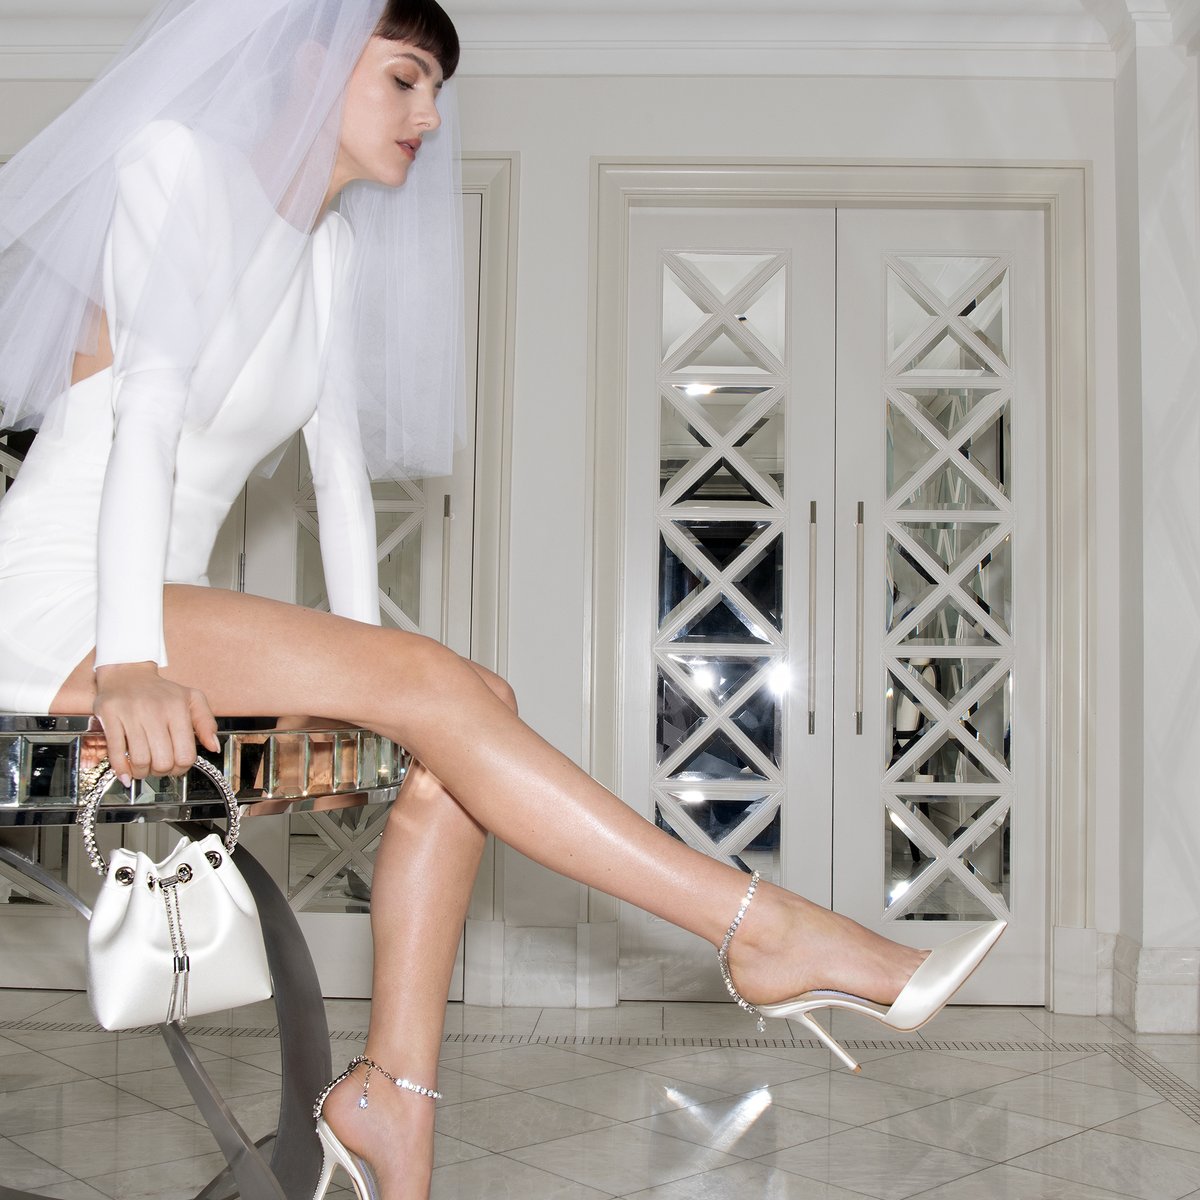 Ensure your bridal style is suitably romantic with our iconic Saeda pumps and Bon Bon handbag - a match made in heaven
#IDoInChoo  

jimmychoo.com/.../bridal.../…